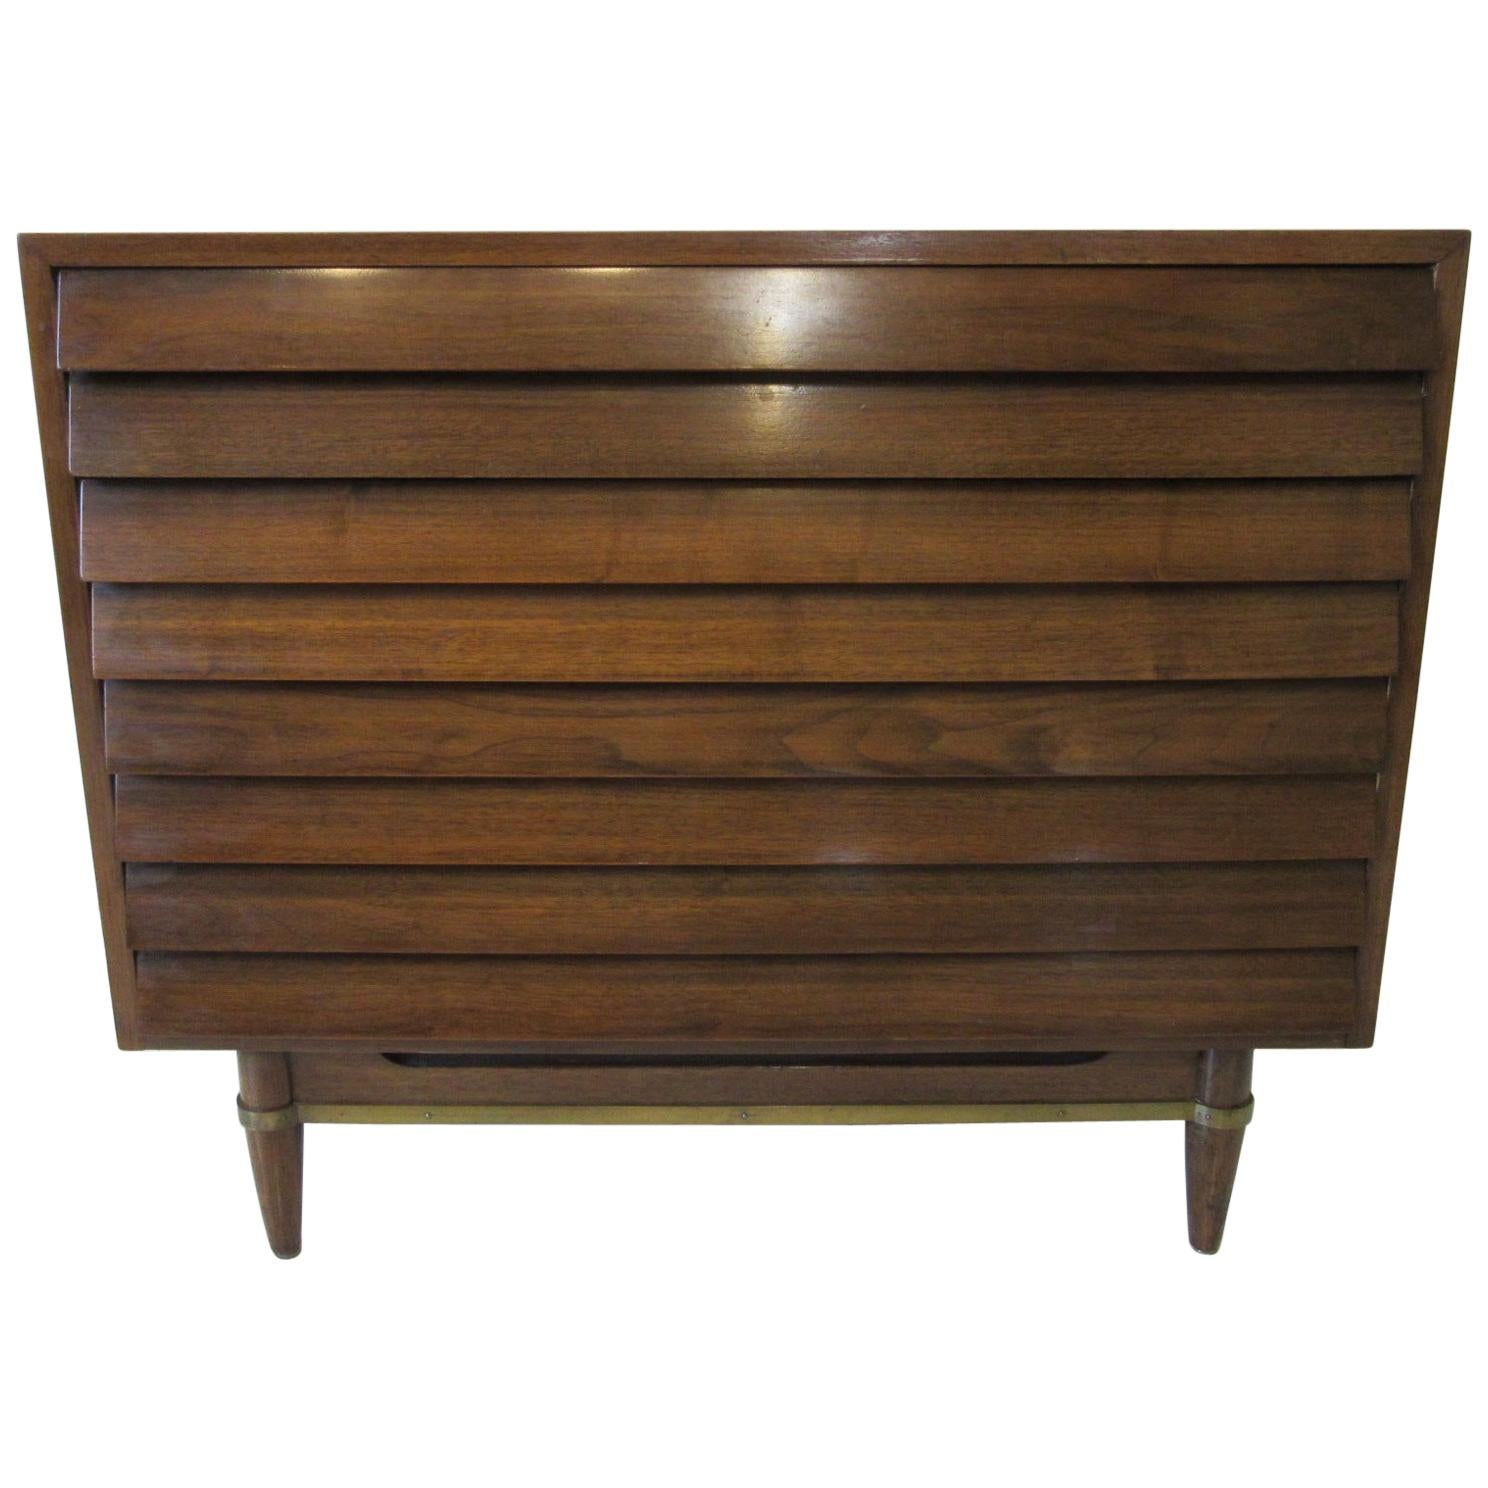 Lovered Walnut Small Dresser / Chest by American of Martinsville